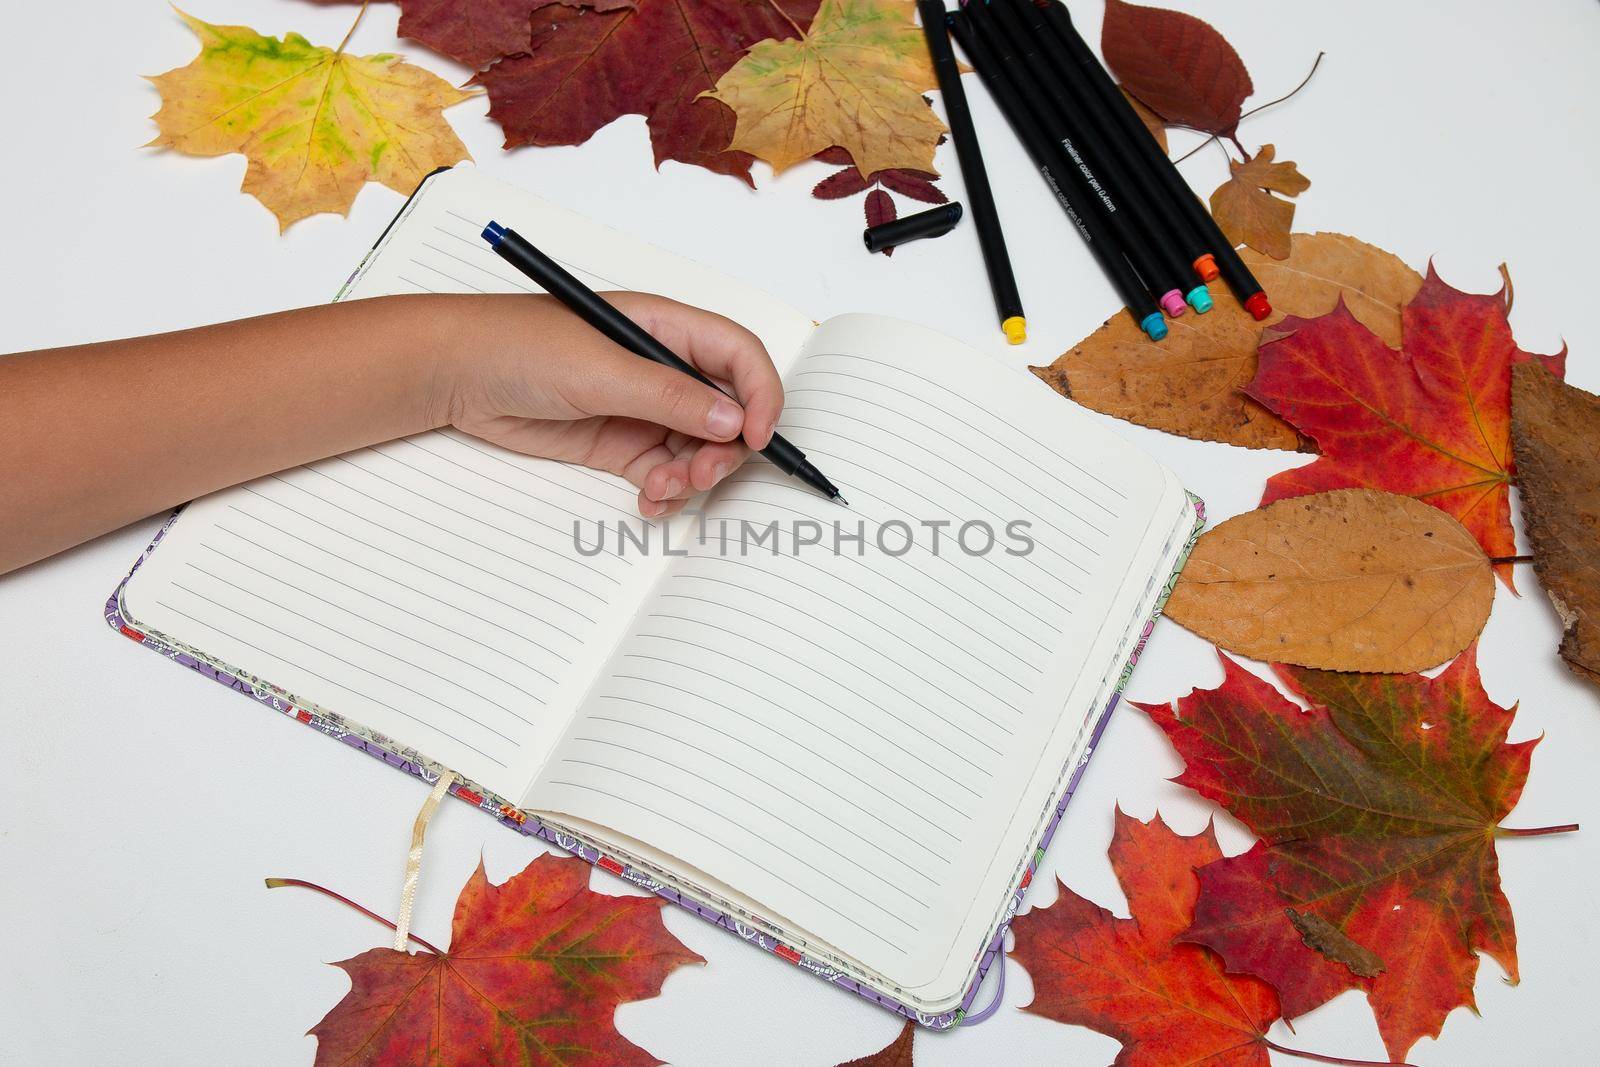 children's hand with a pen on a notebook writes on a white table, autumn leaves, back to school, copy place